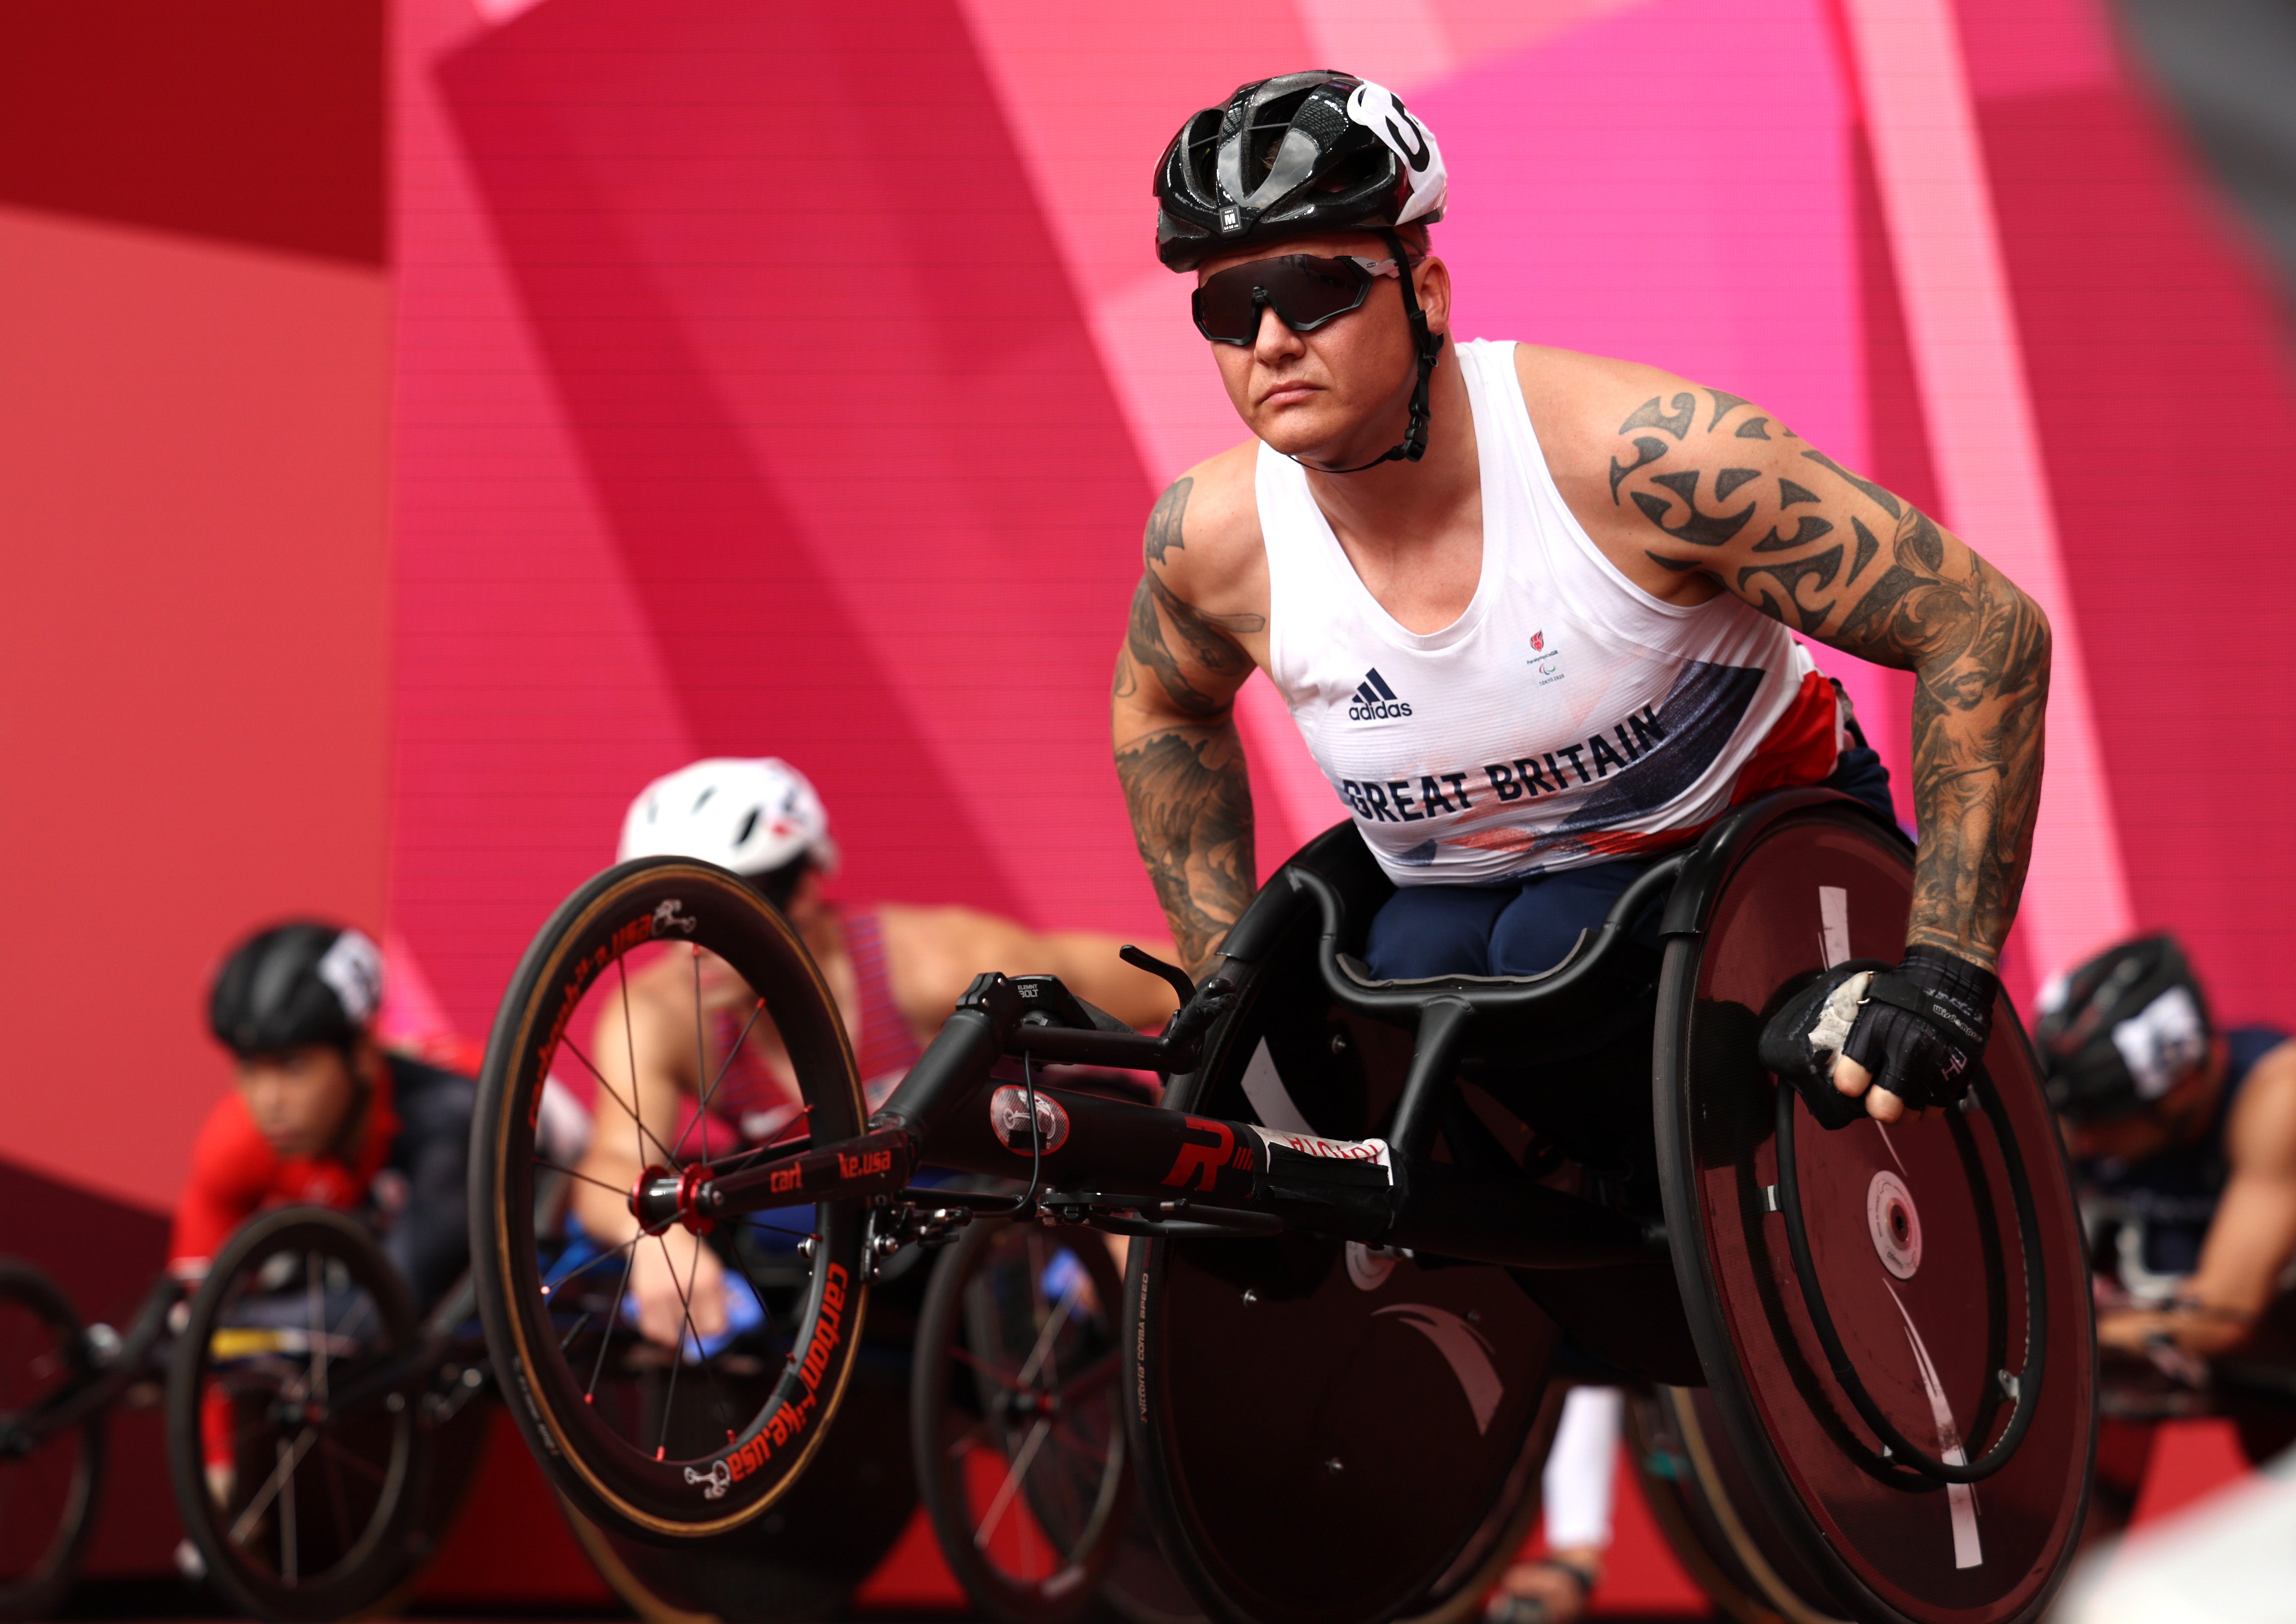 David Weir of Team Great Britain prepares to compete in the men's 1500m